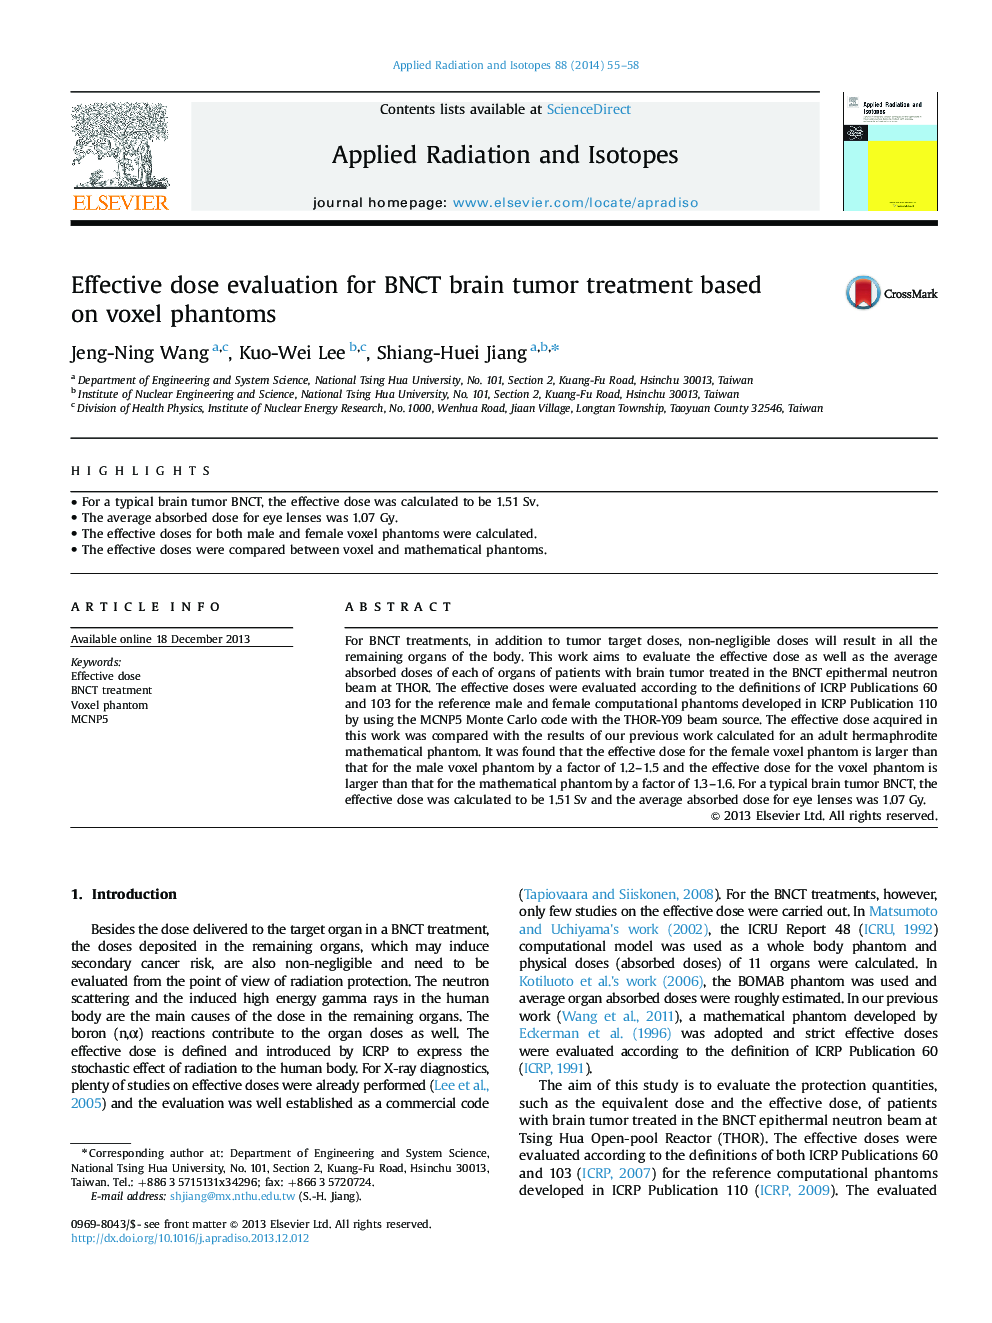 Effective dose evaluation for BNCT brain tumor treatment based on voxel phantoms